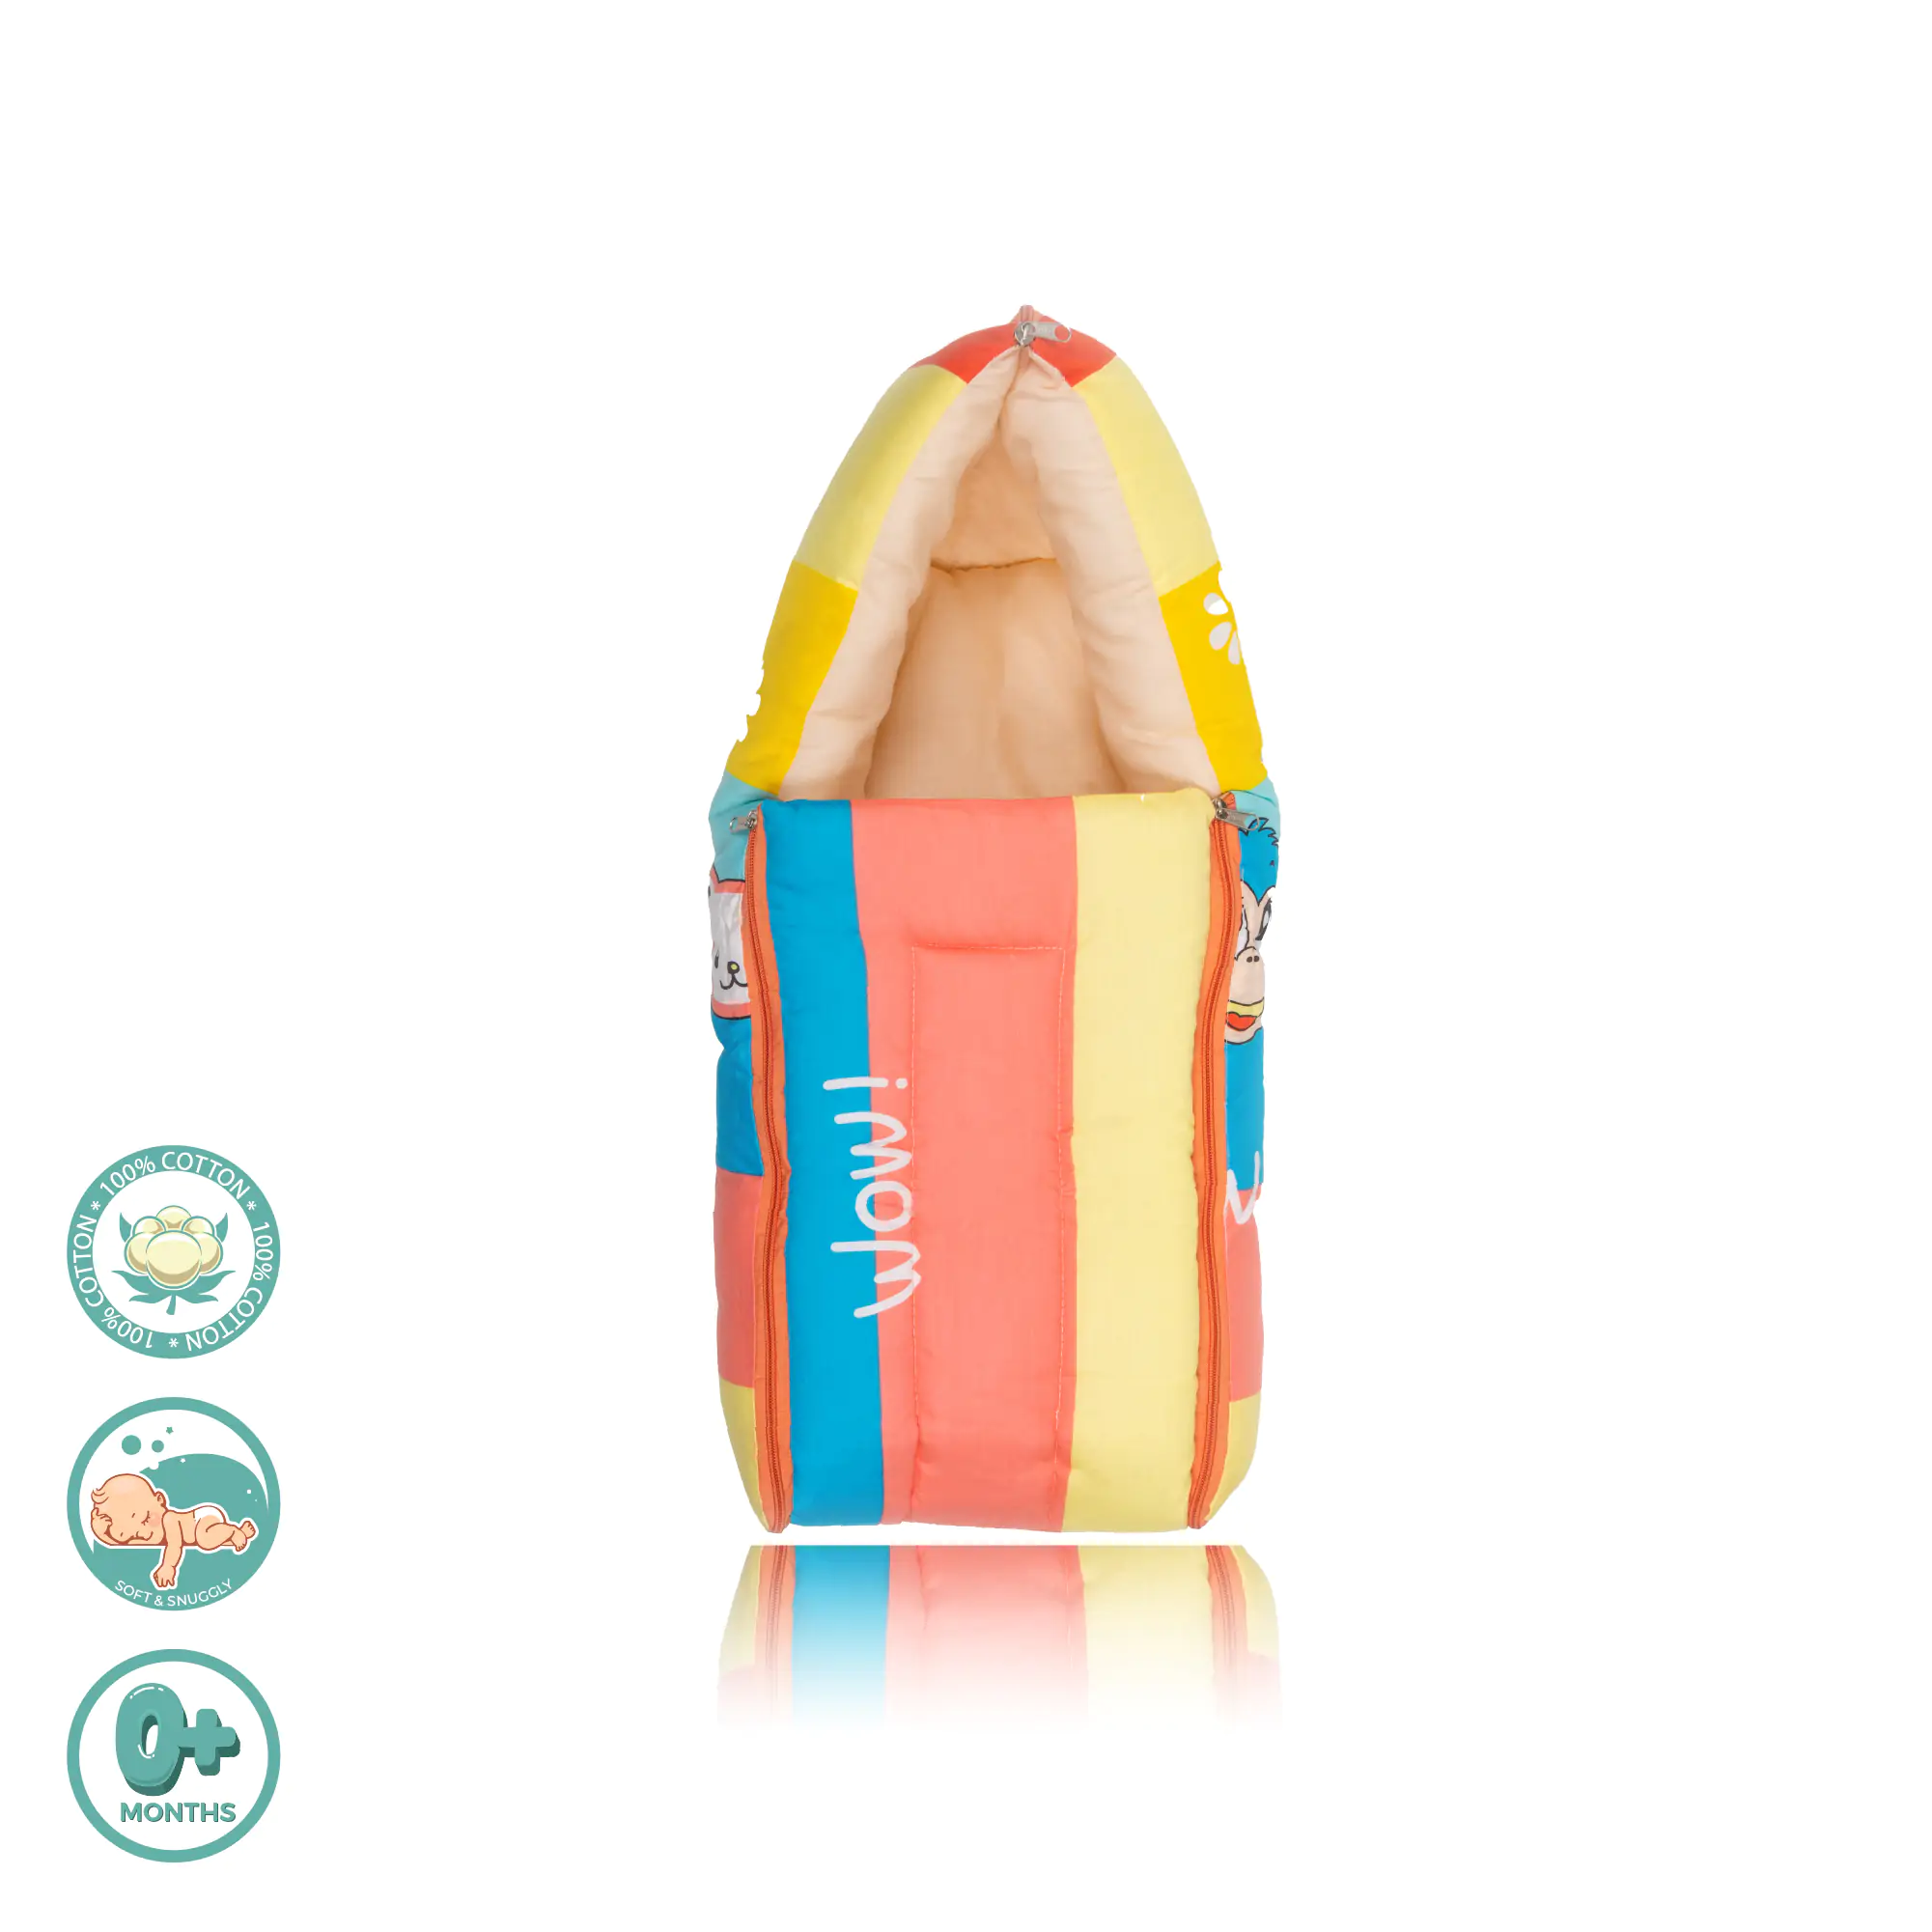 4–in-1 Soft & Snuggly Baby Sleeping Bag/ Carry Nest with 3-way Zip Opening- Magical Rainbow  